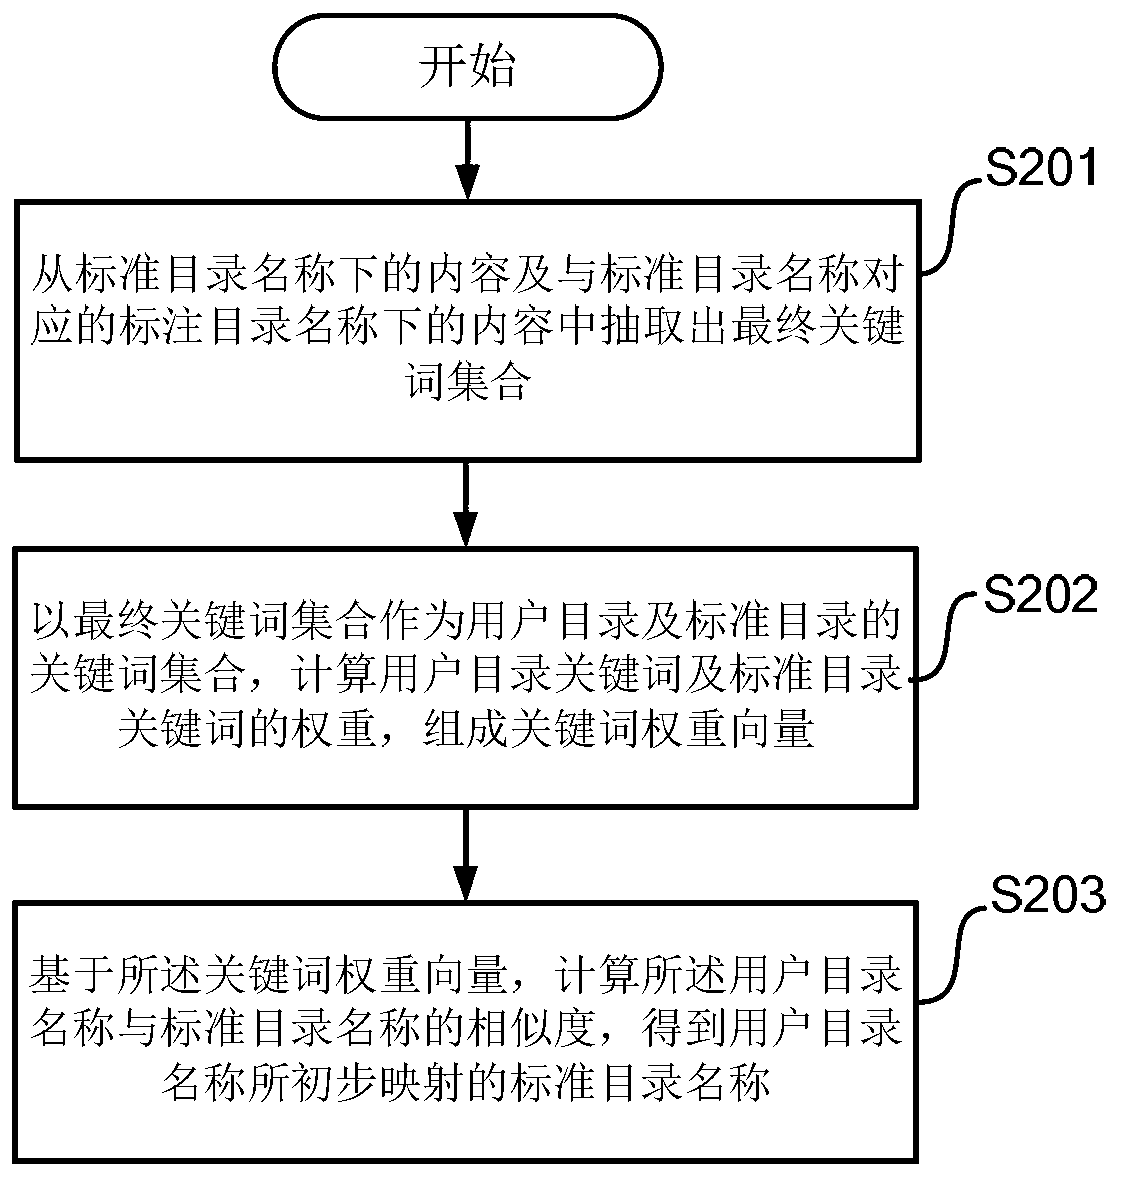 Directory mapping relationship mining device and directory mapping relationship mining device